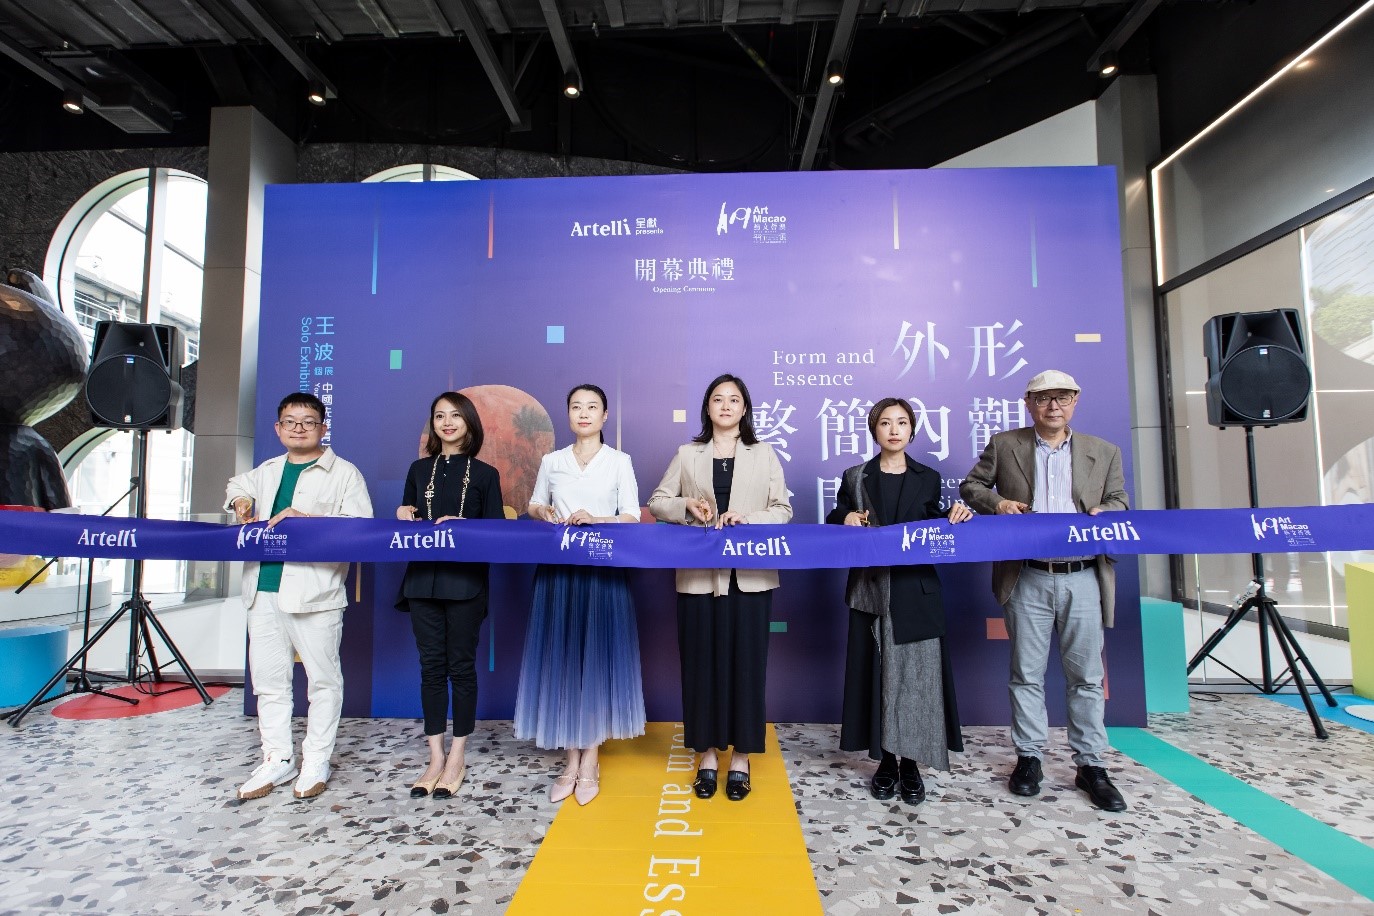 Representatives from Liaison Office of the Central People’s Government in the Macao SAR, the Macao SAR government, senior executives from Melco Resorts & Entertainment and Forward Fashion, and artist Wang Bo (first from left) joined together to kick off the exhibition at Artelli